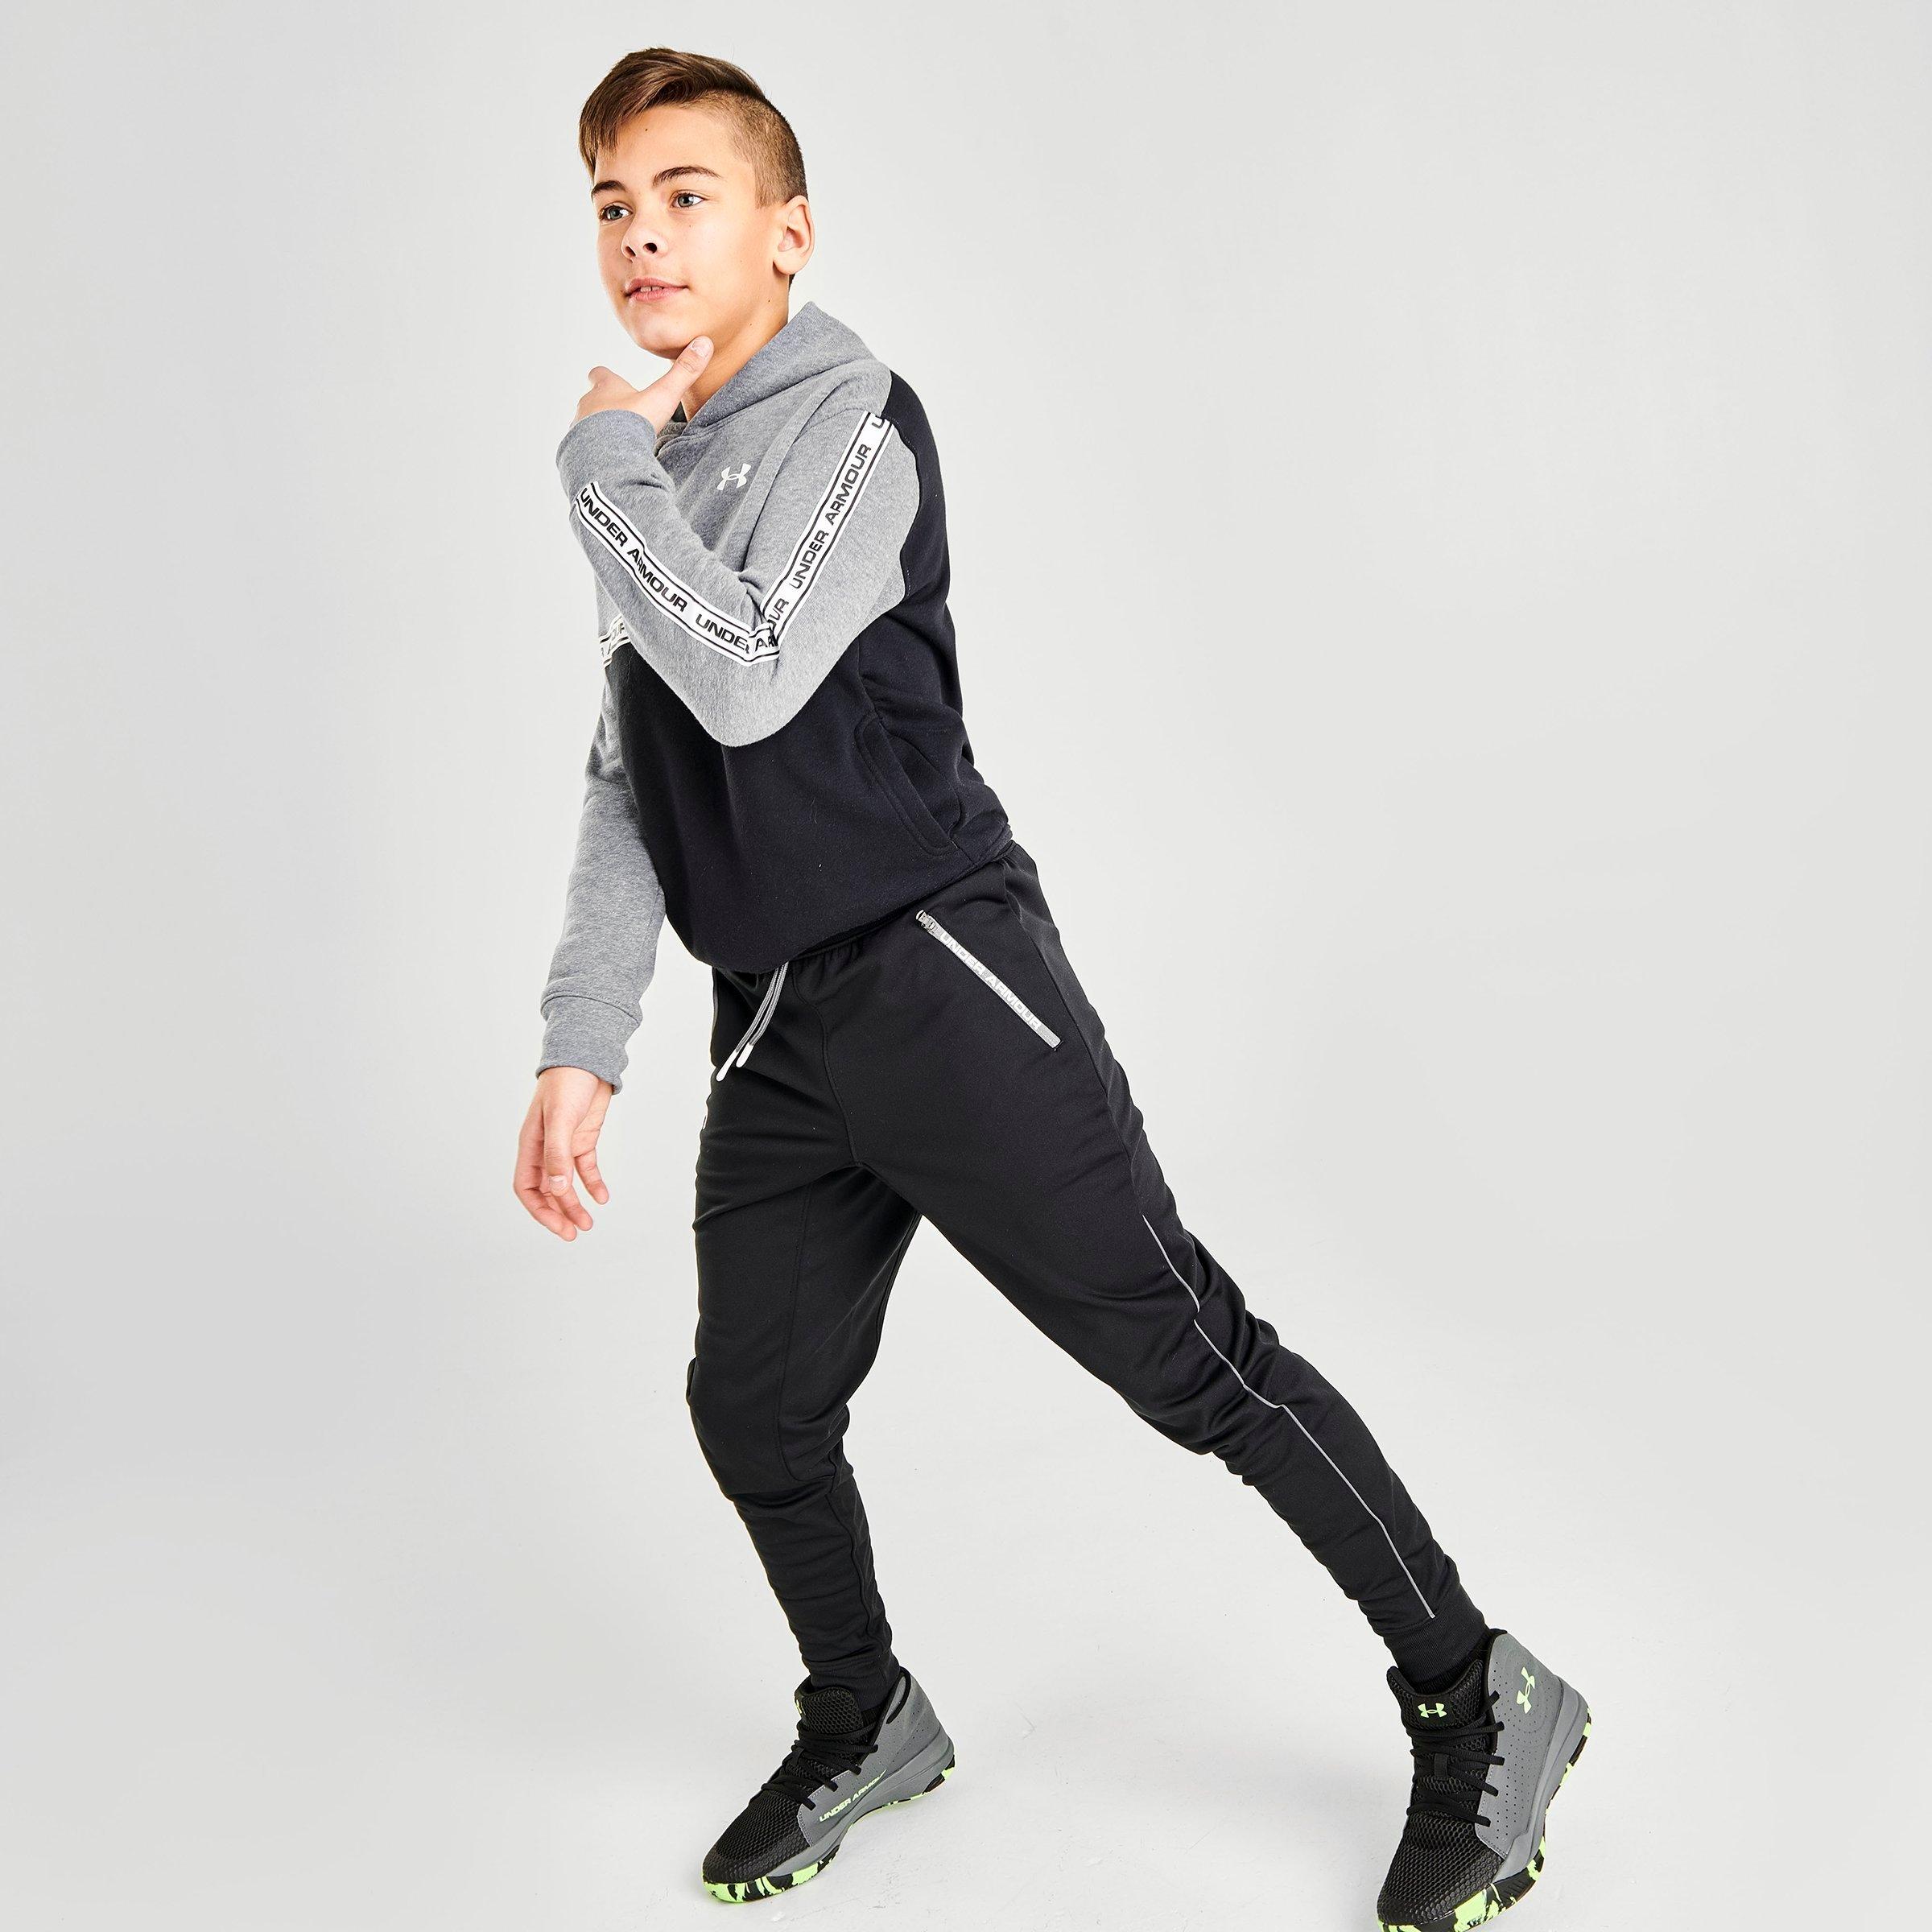 under armour pennant pants